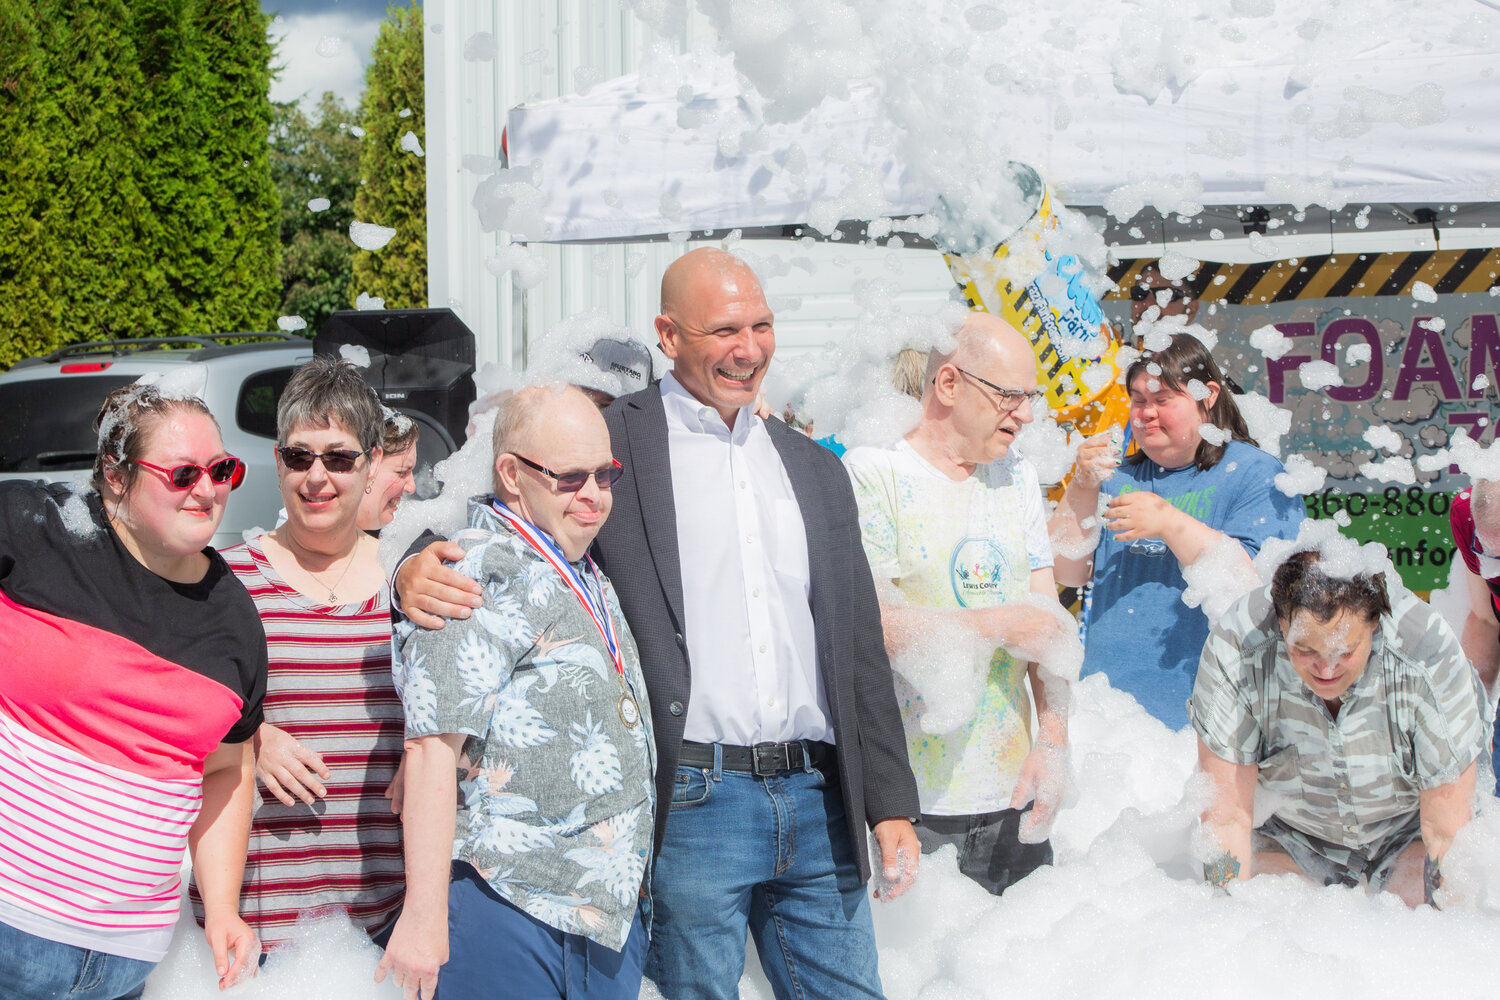 Rep. Peter Abbarno, center, poses with members of Lewis County Accessible Recreation during a celebratory foam party. The group, which provides recreational opportunities for people with disabilities, recently celebrated it's first year in operation.